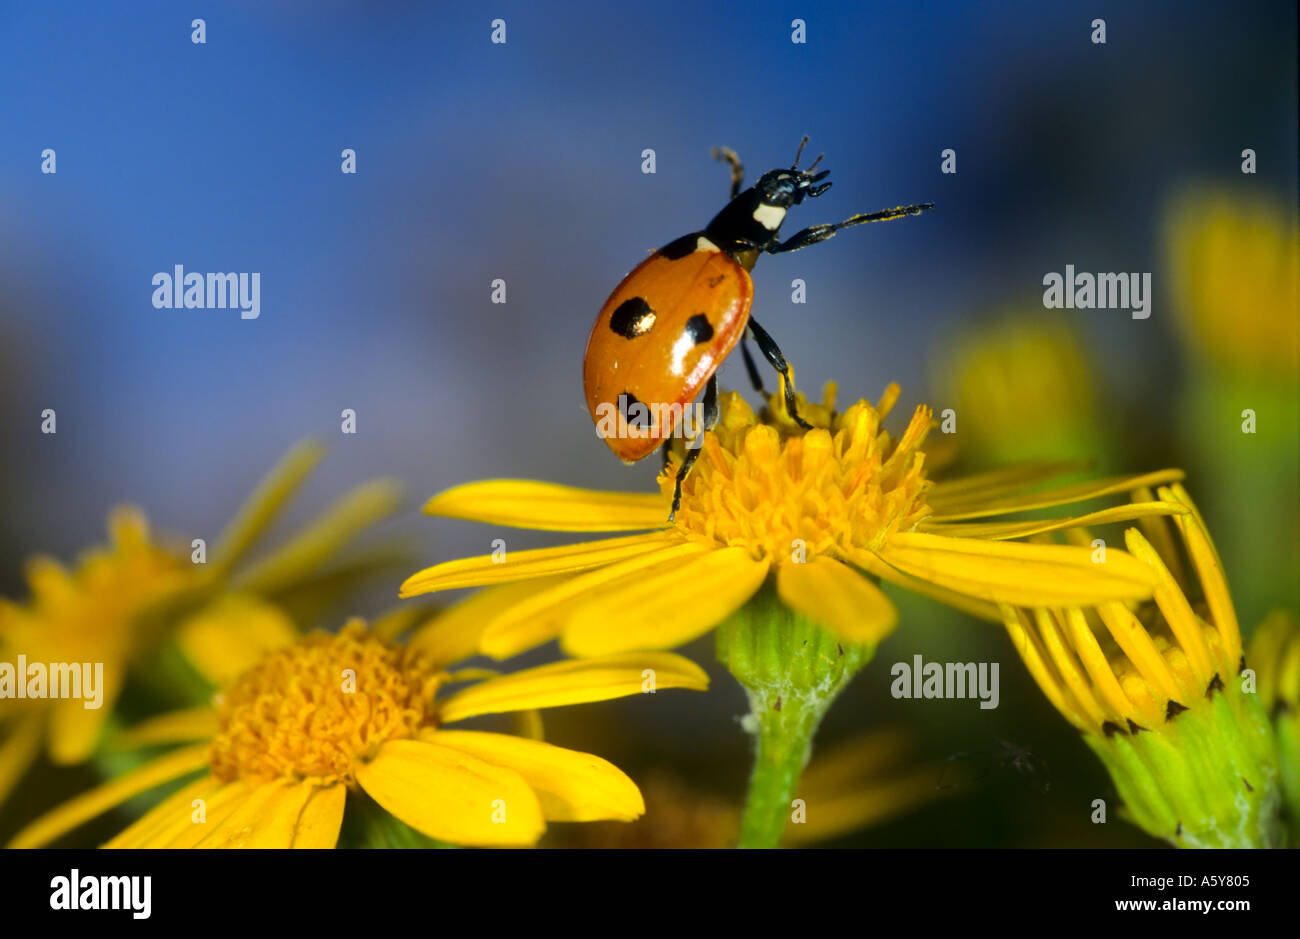 Ladybird Coccinella 7 punctata on Flower standing upright ready to fly potton bedfordshire Stock Photo